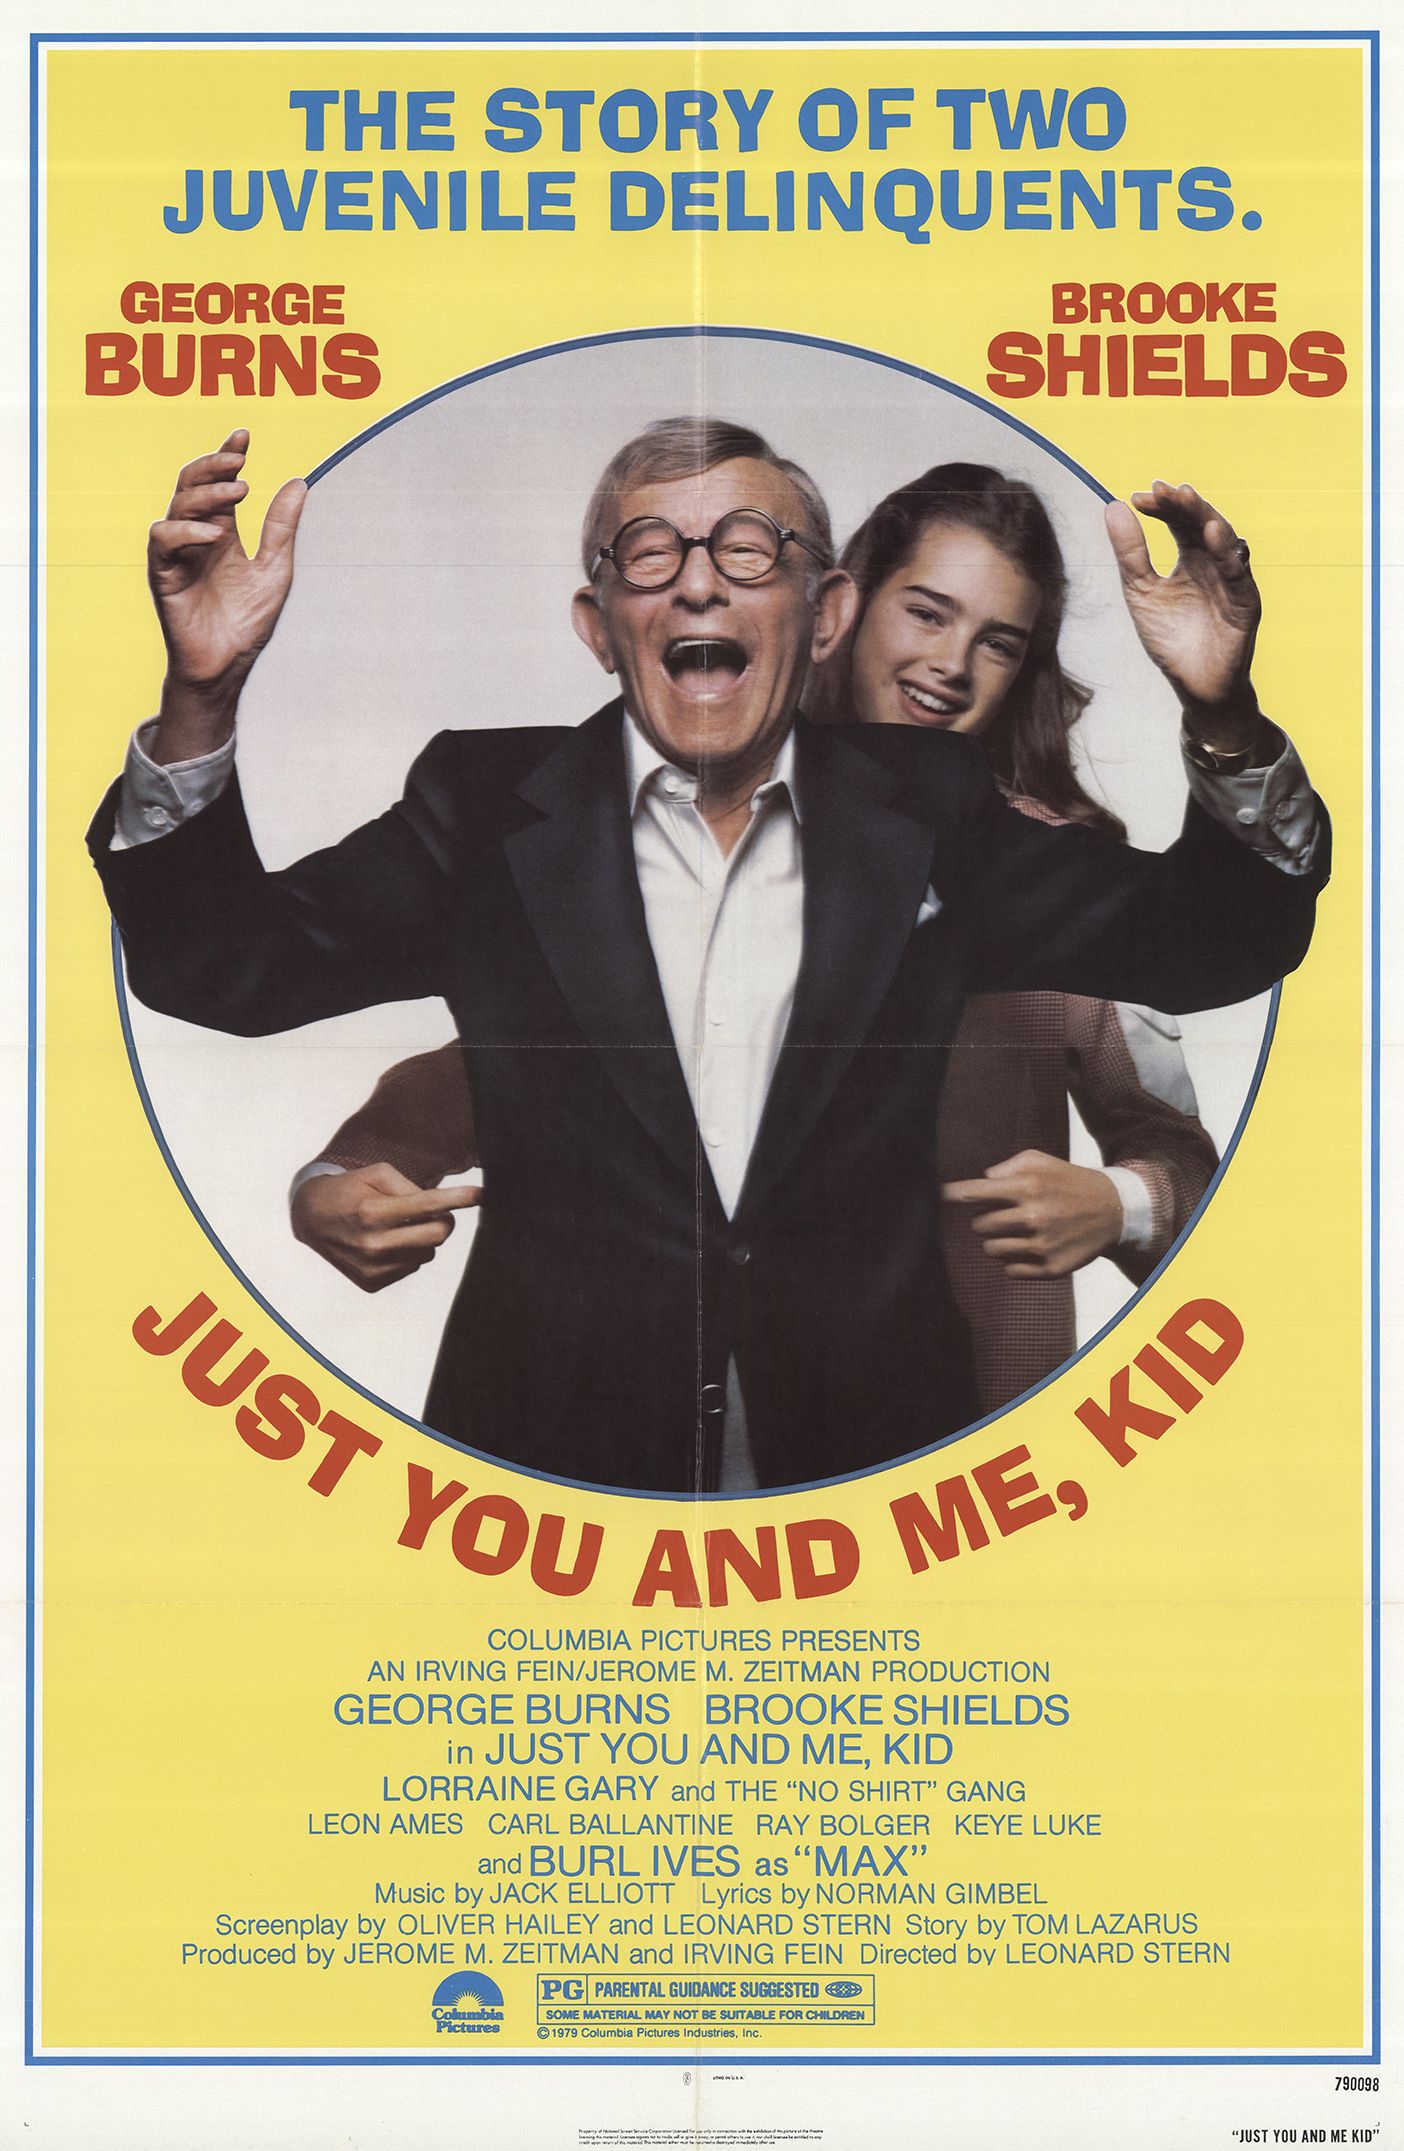 Just You and Me, Kid (1979) starring George Burns on DVD on DVD